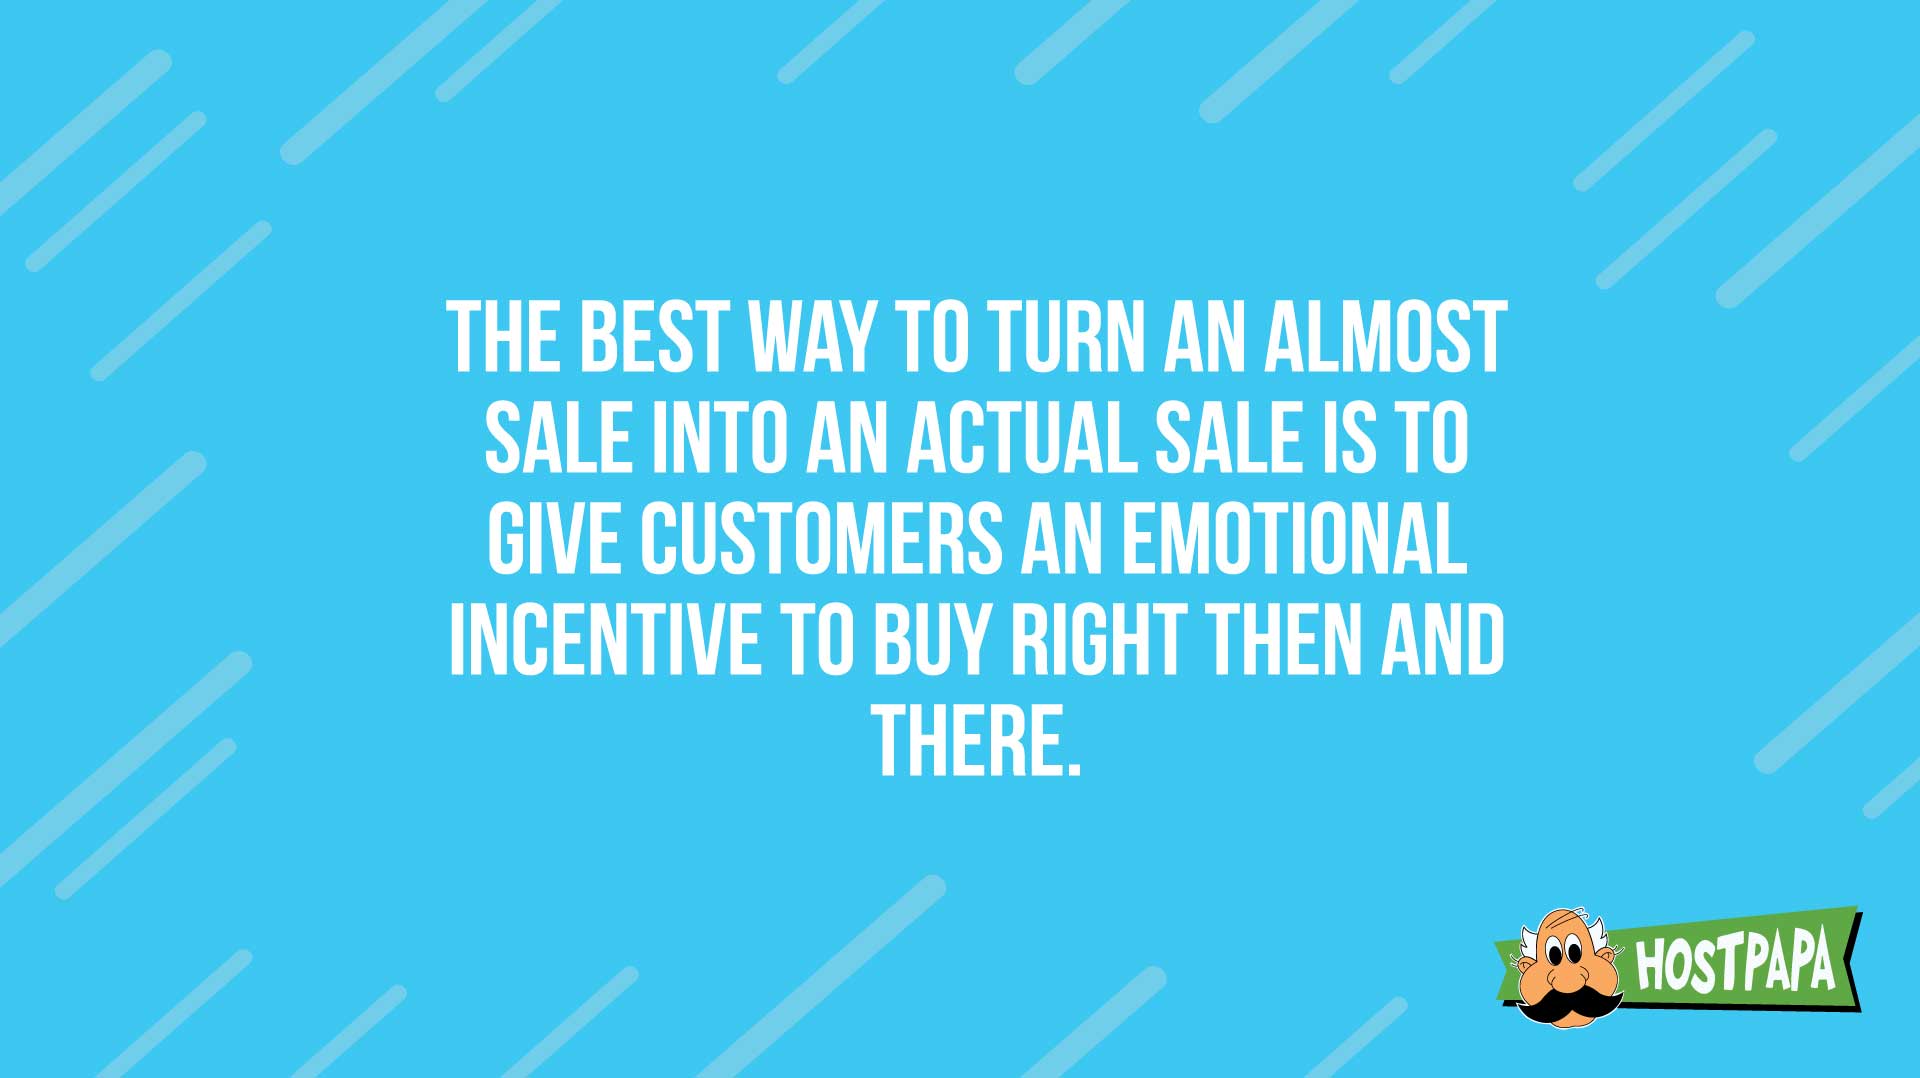 The best way to turn an almost sale into a sale is to give customers an emotional incentive